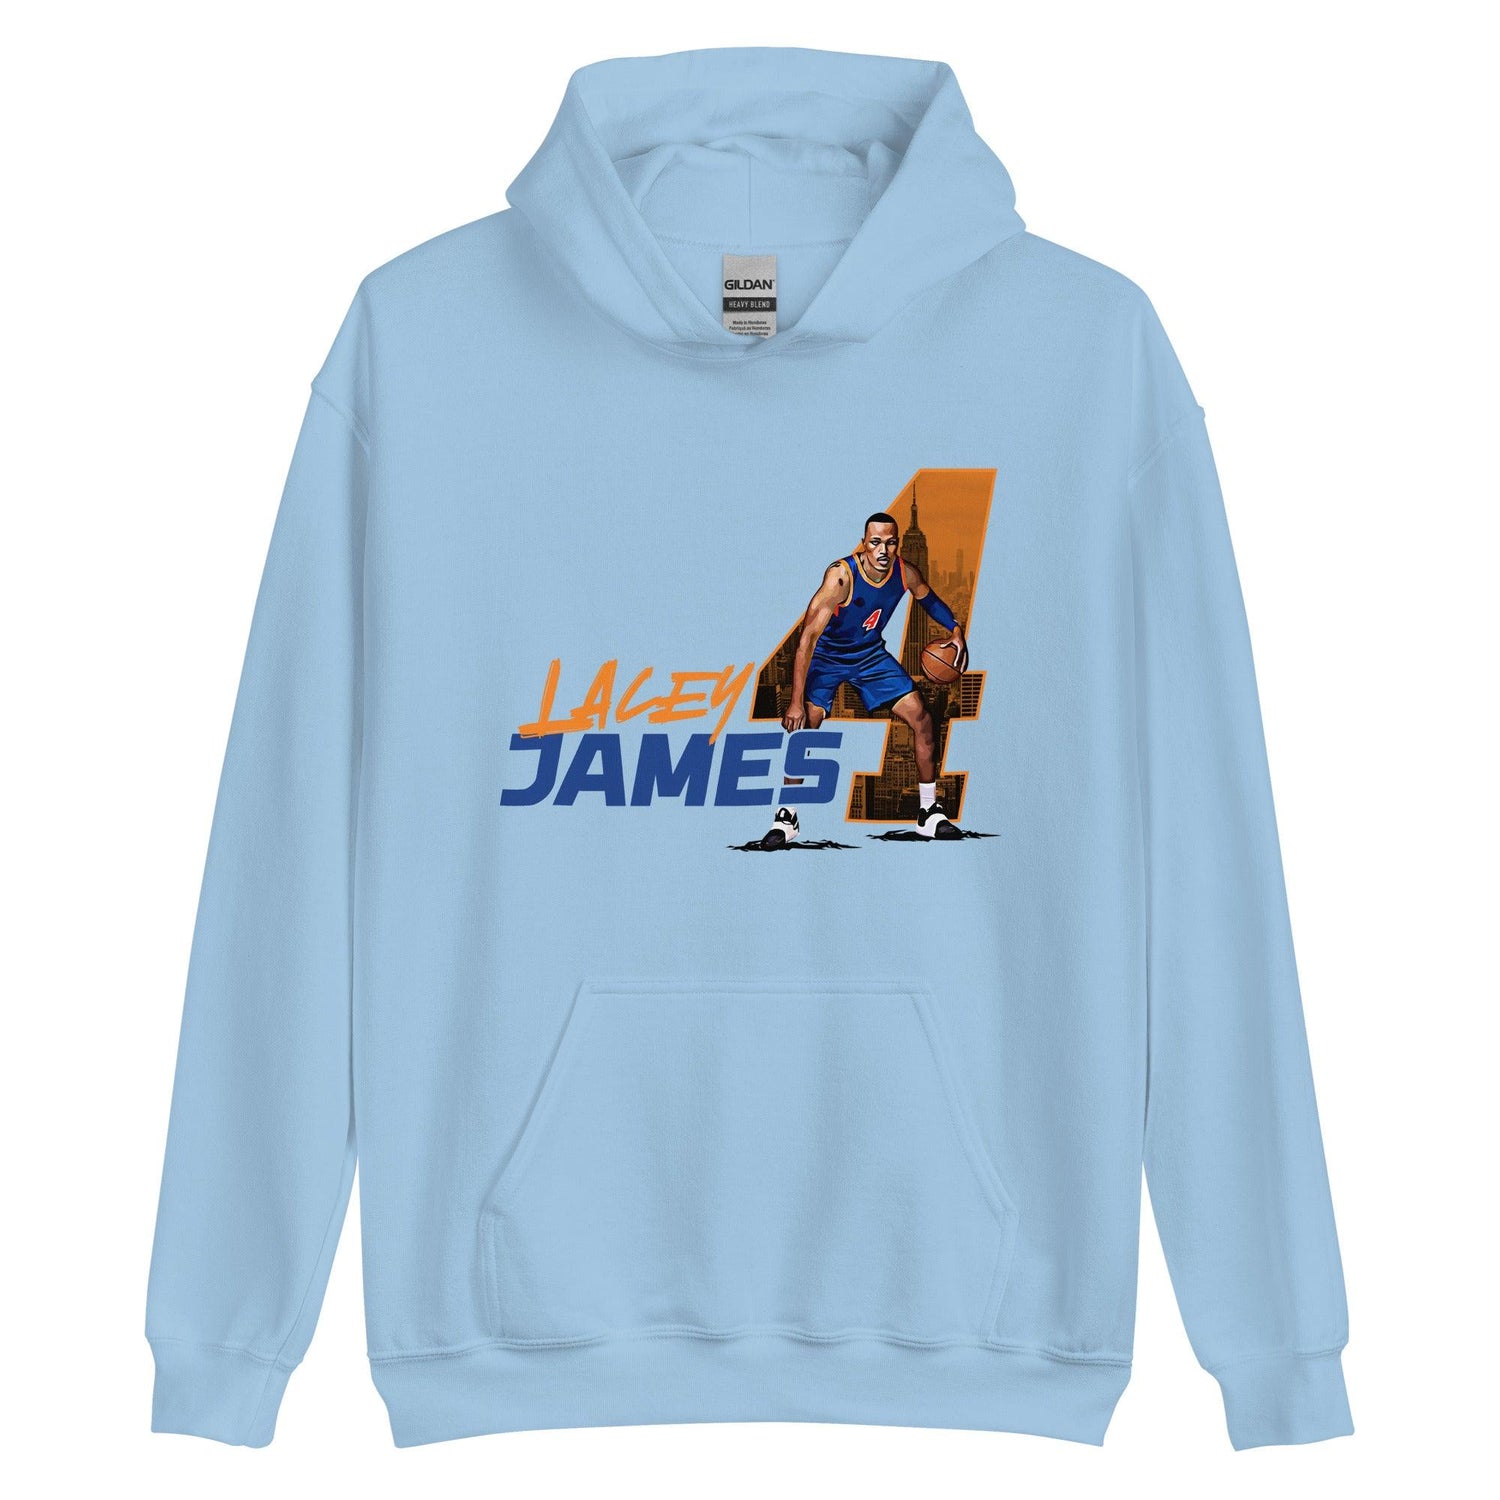 Lacey James "Gameday" Hoodie - Fan Arch